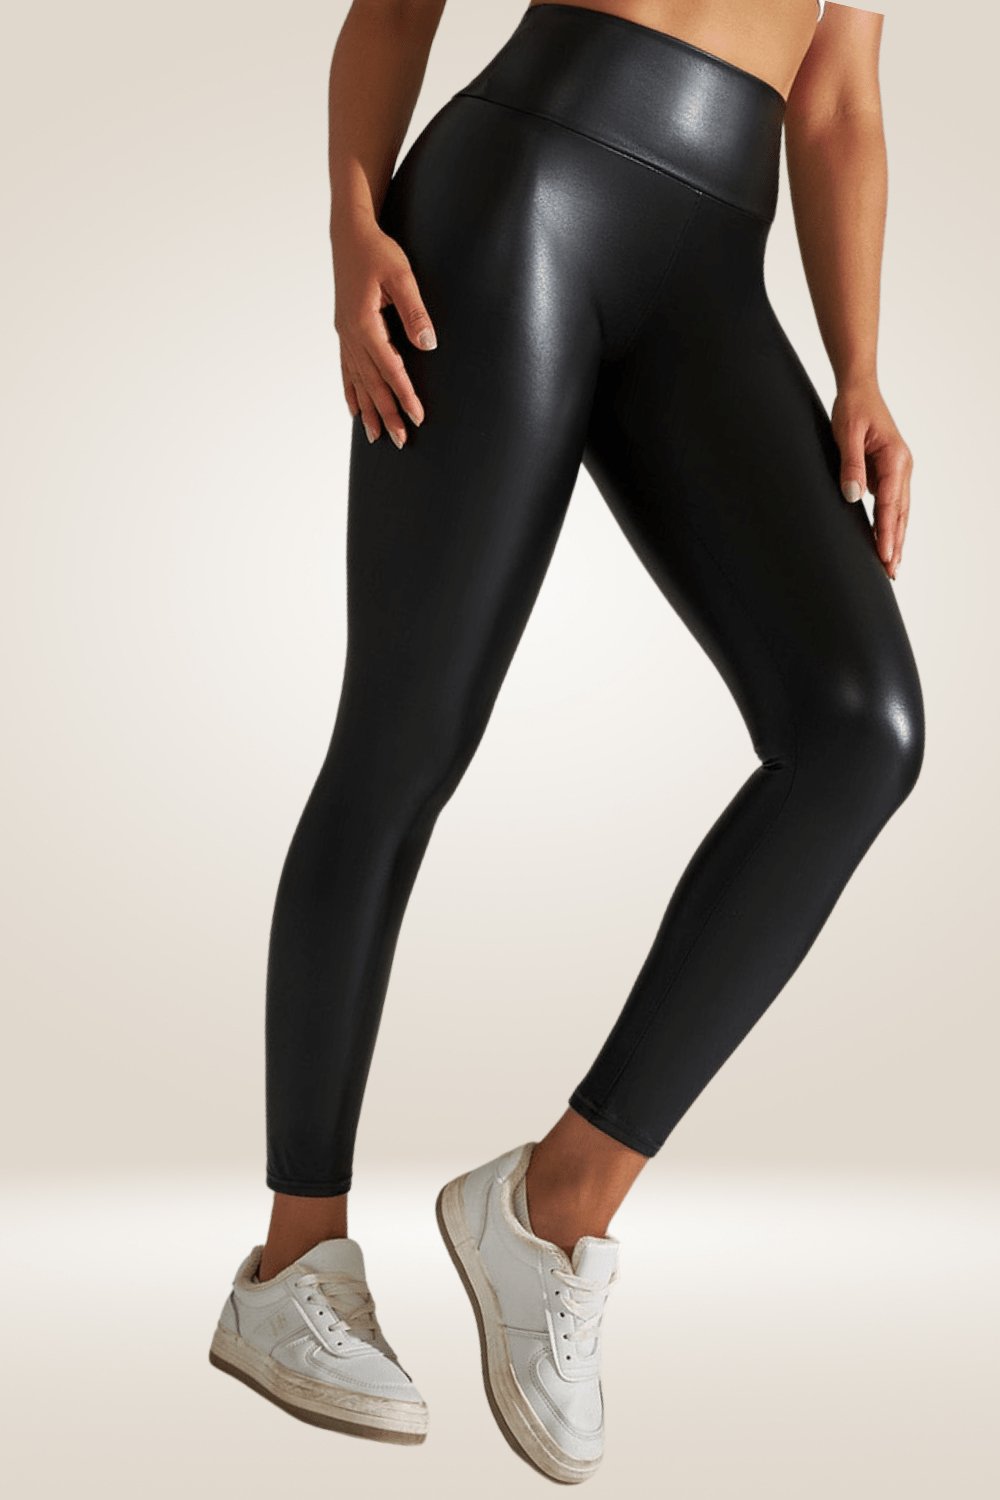 LIQUID MATTE METALLIC LEGGINGS by Mad Style ONE SIZE FITS MOST | eBay